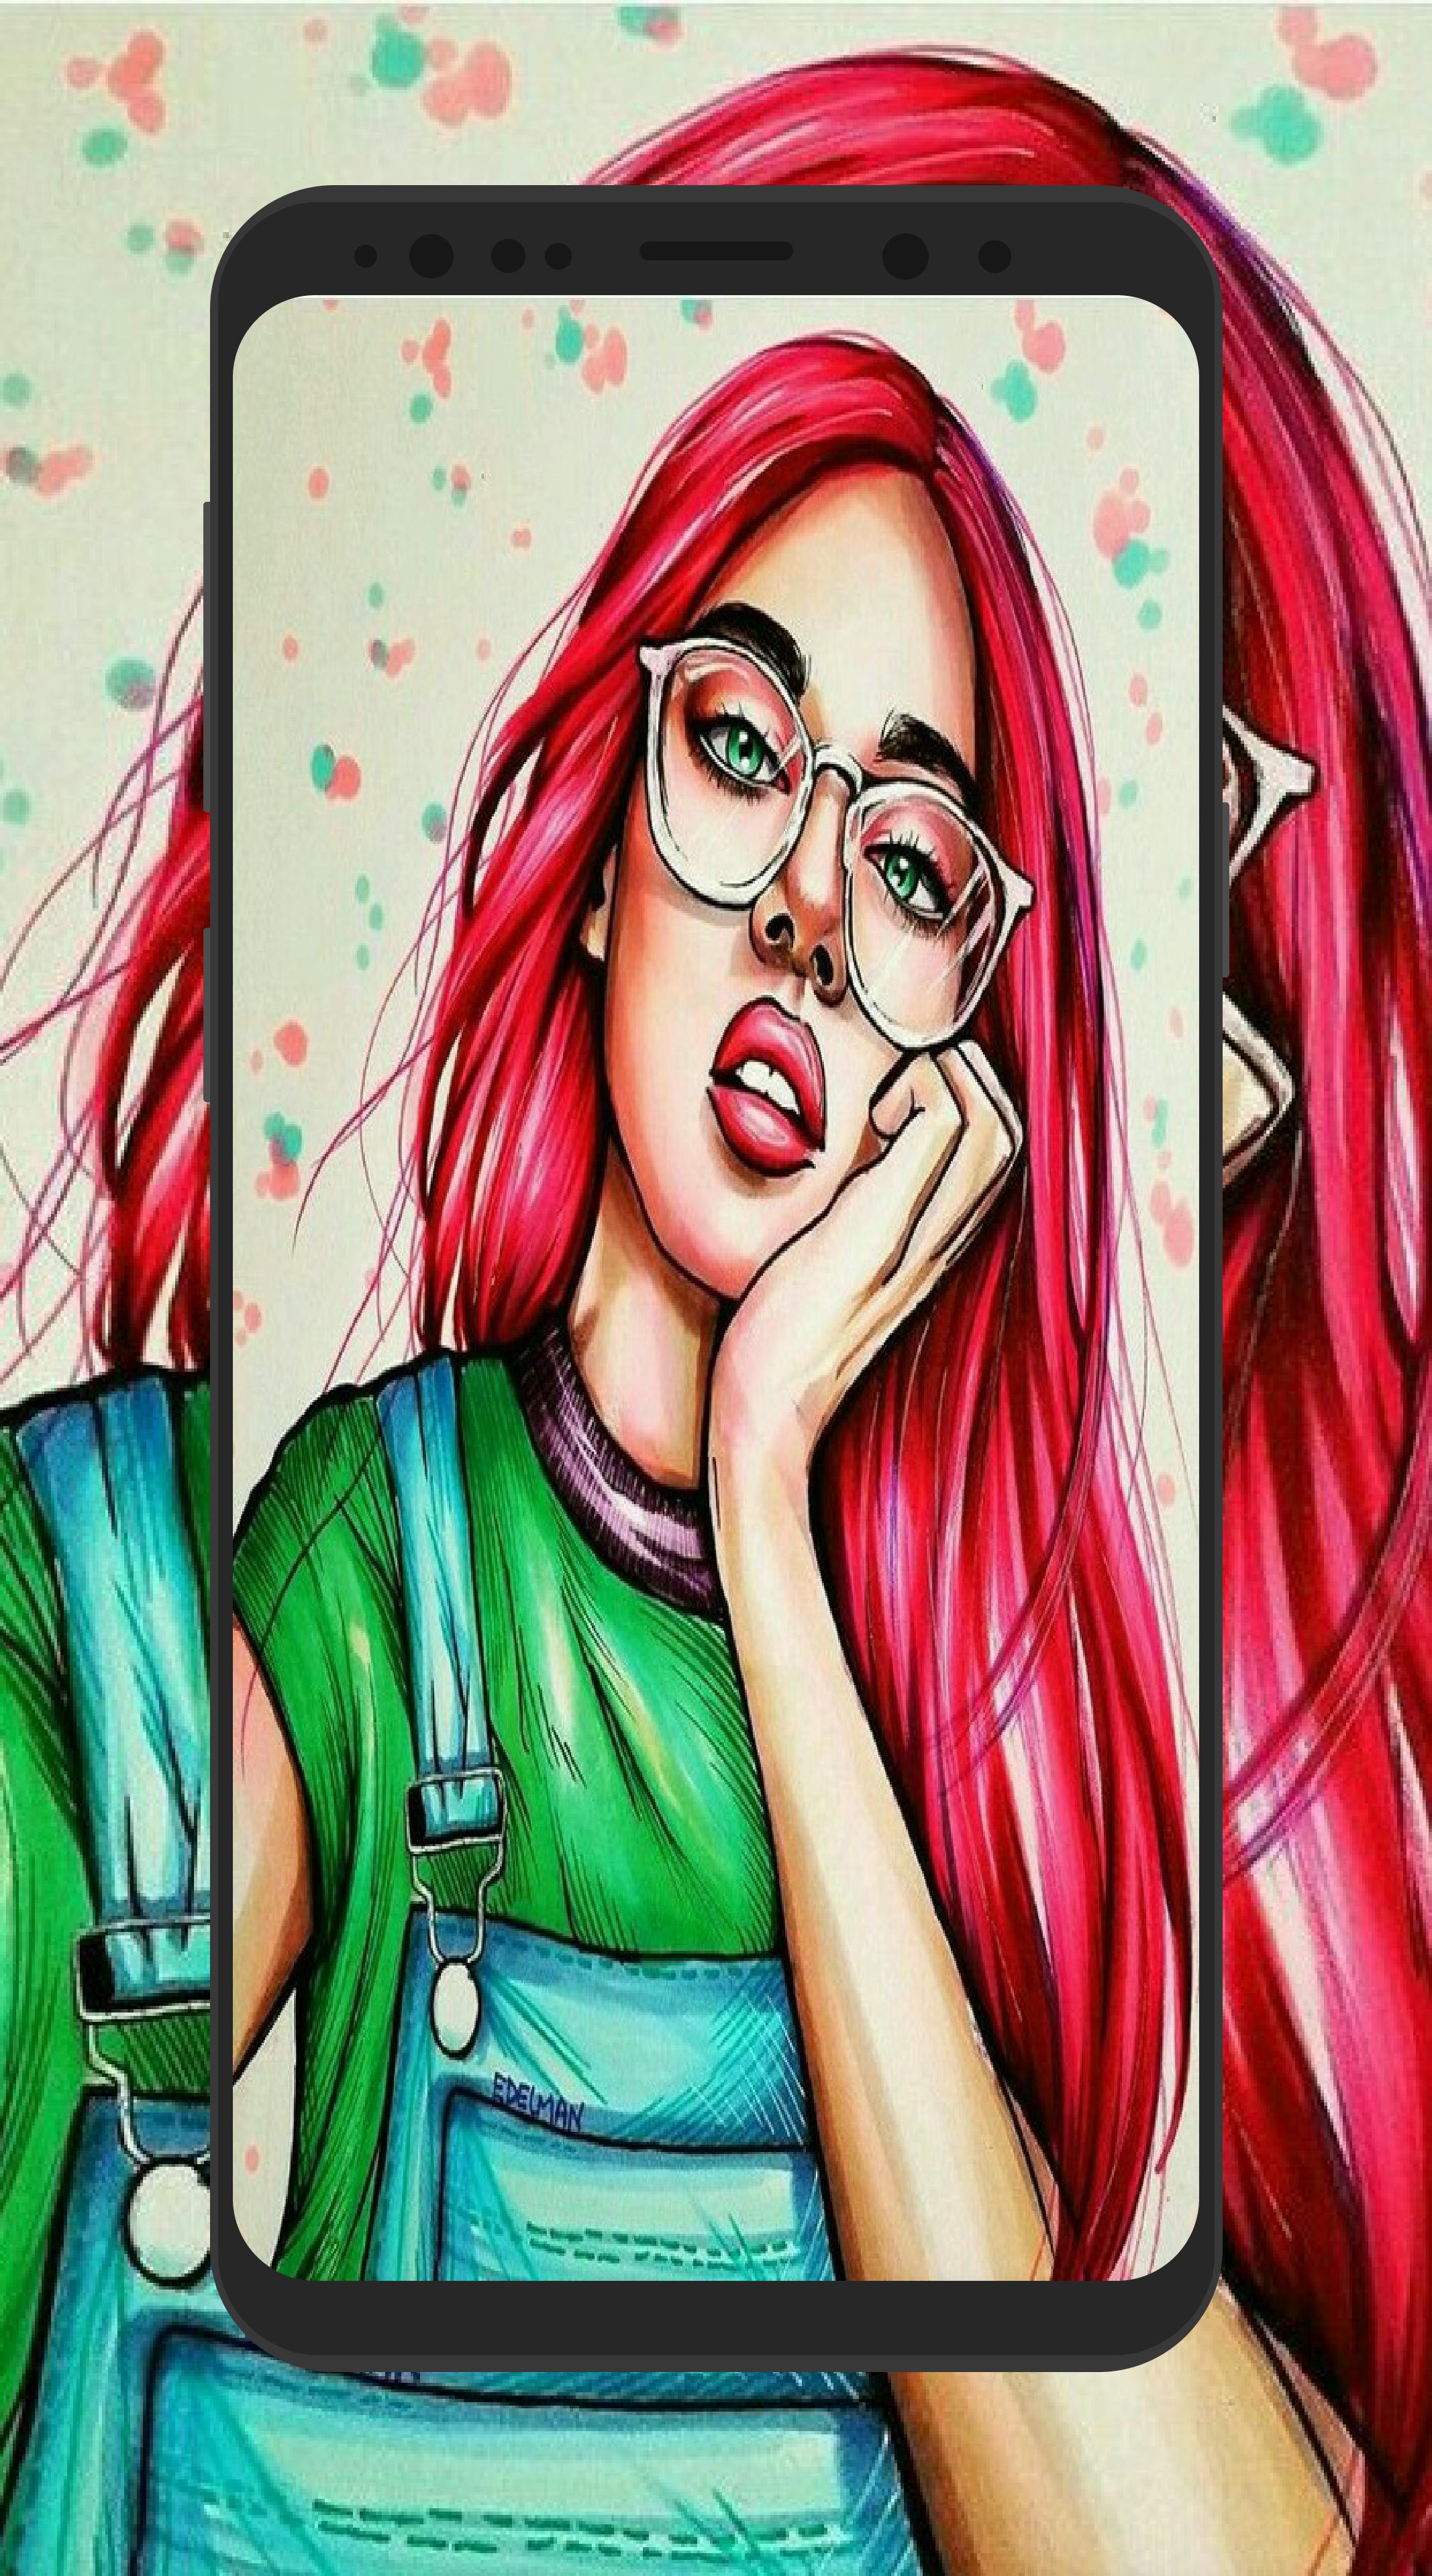 Girly Wallpapers Girly M Art 2020 For Android Apk Download - rose gold wallpaper roblox girl